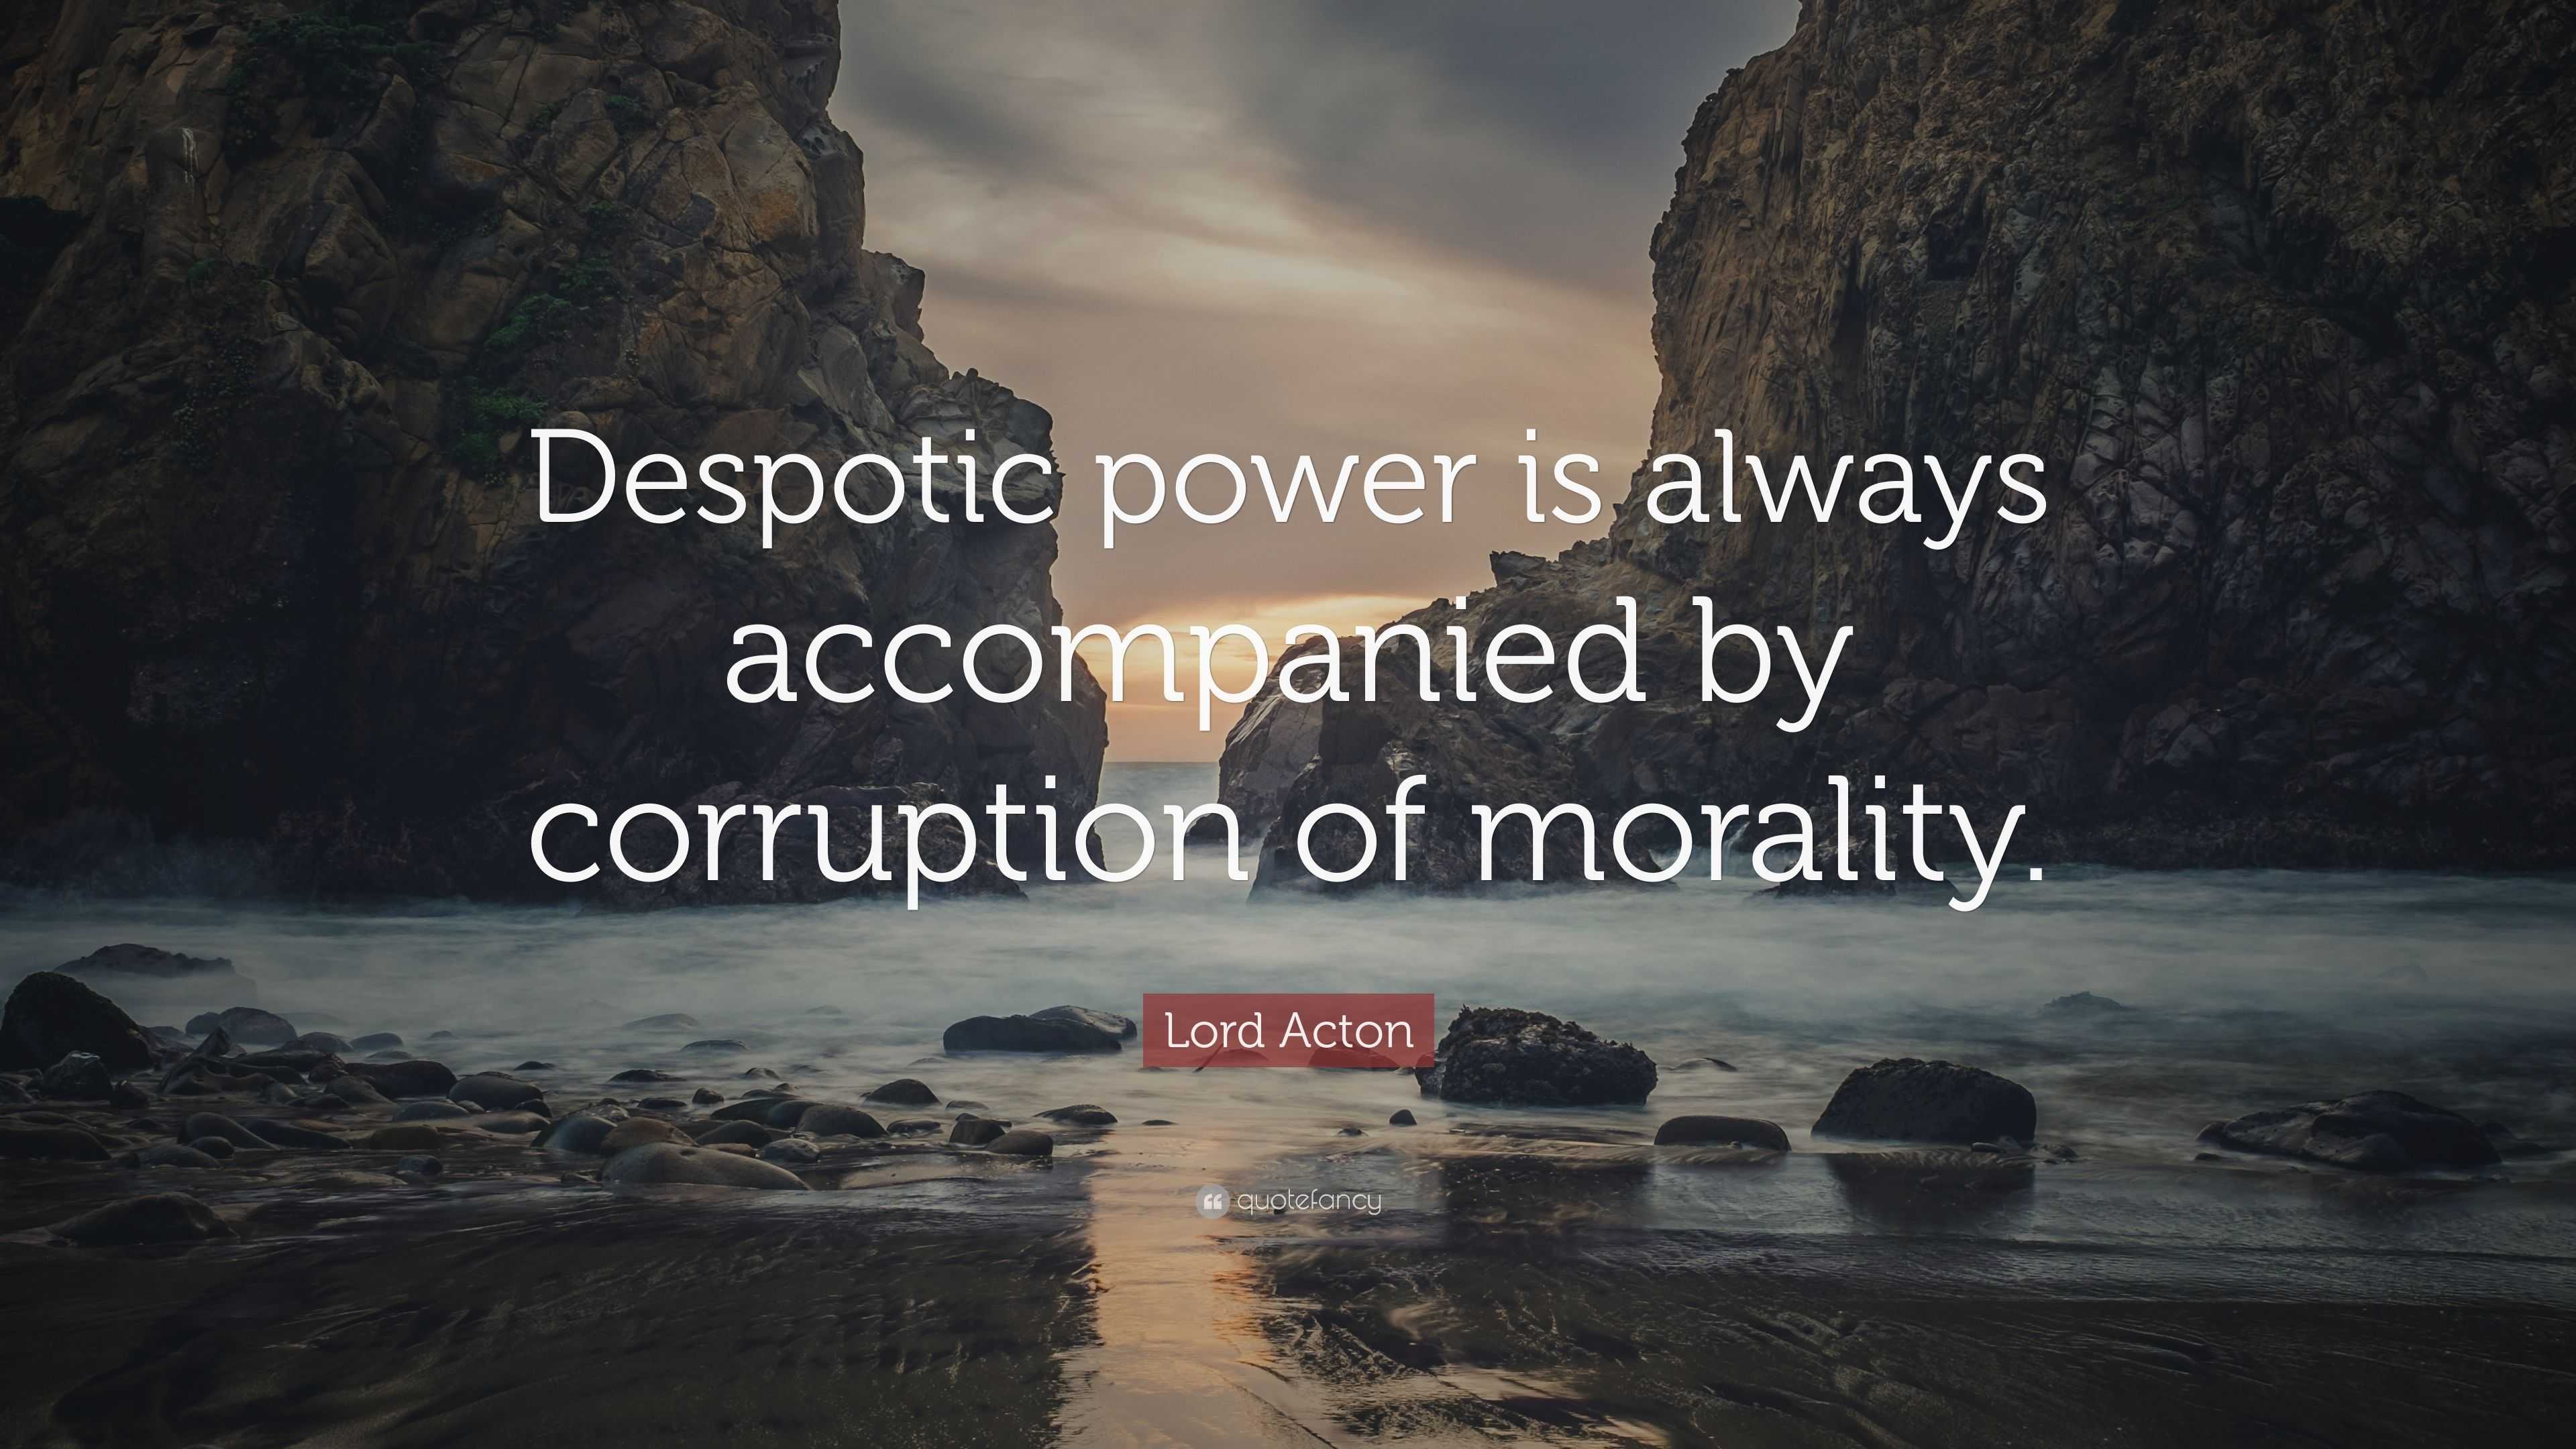 Lord Actons Aphorism Of Power